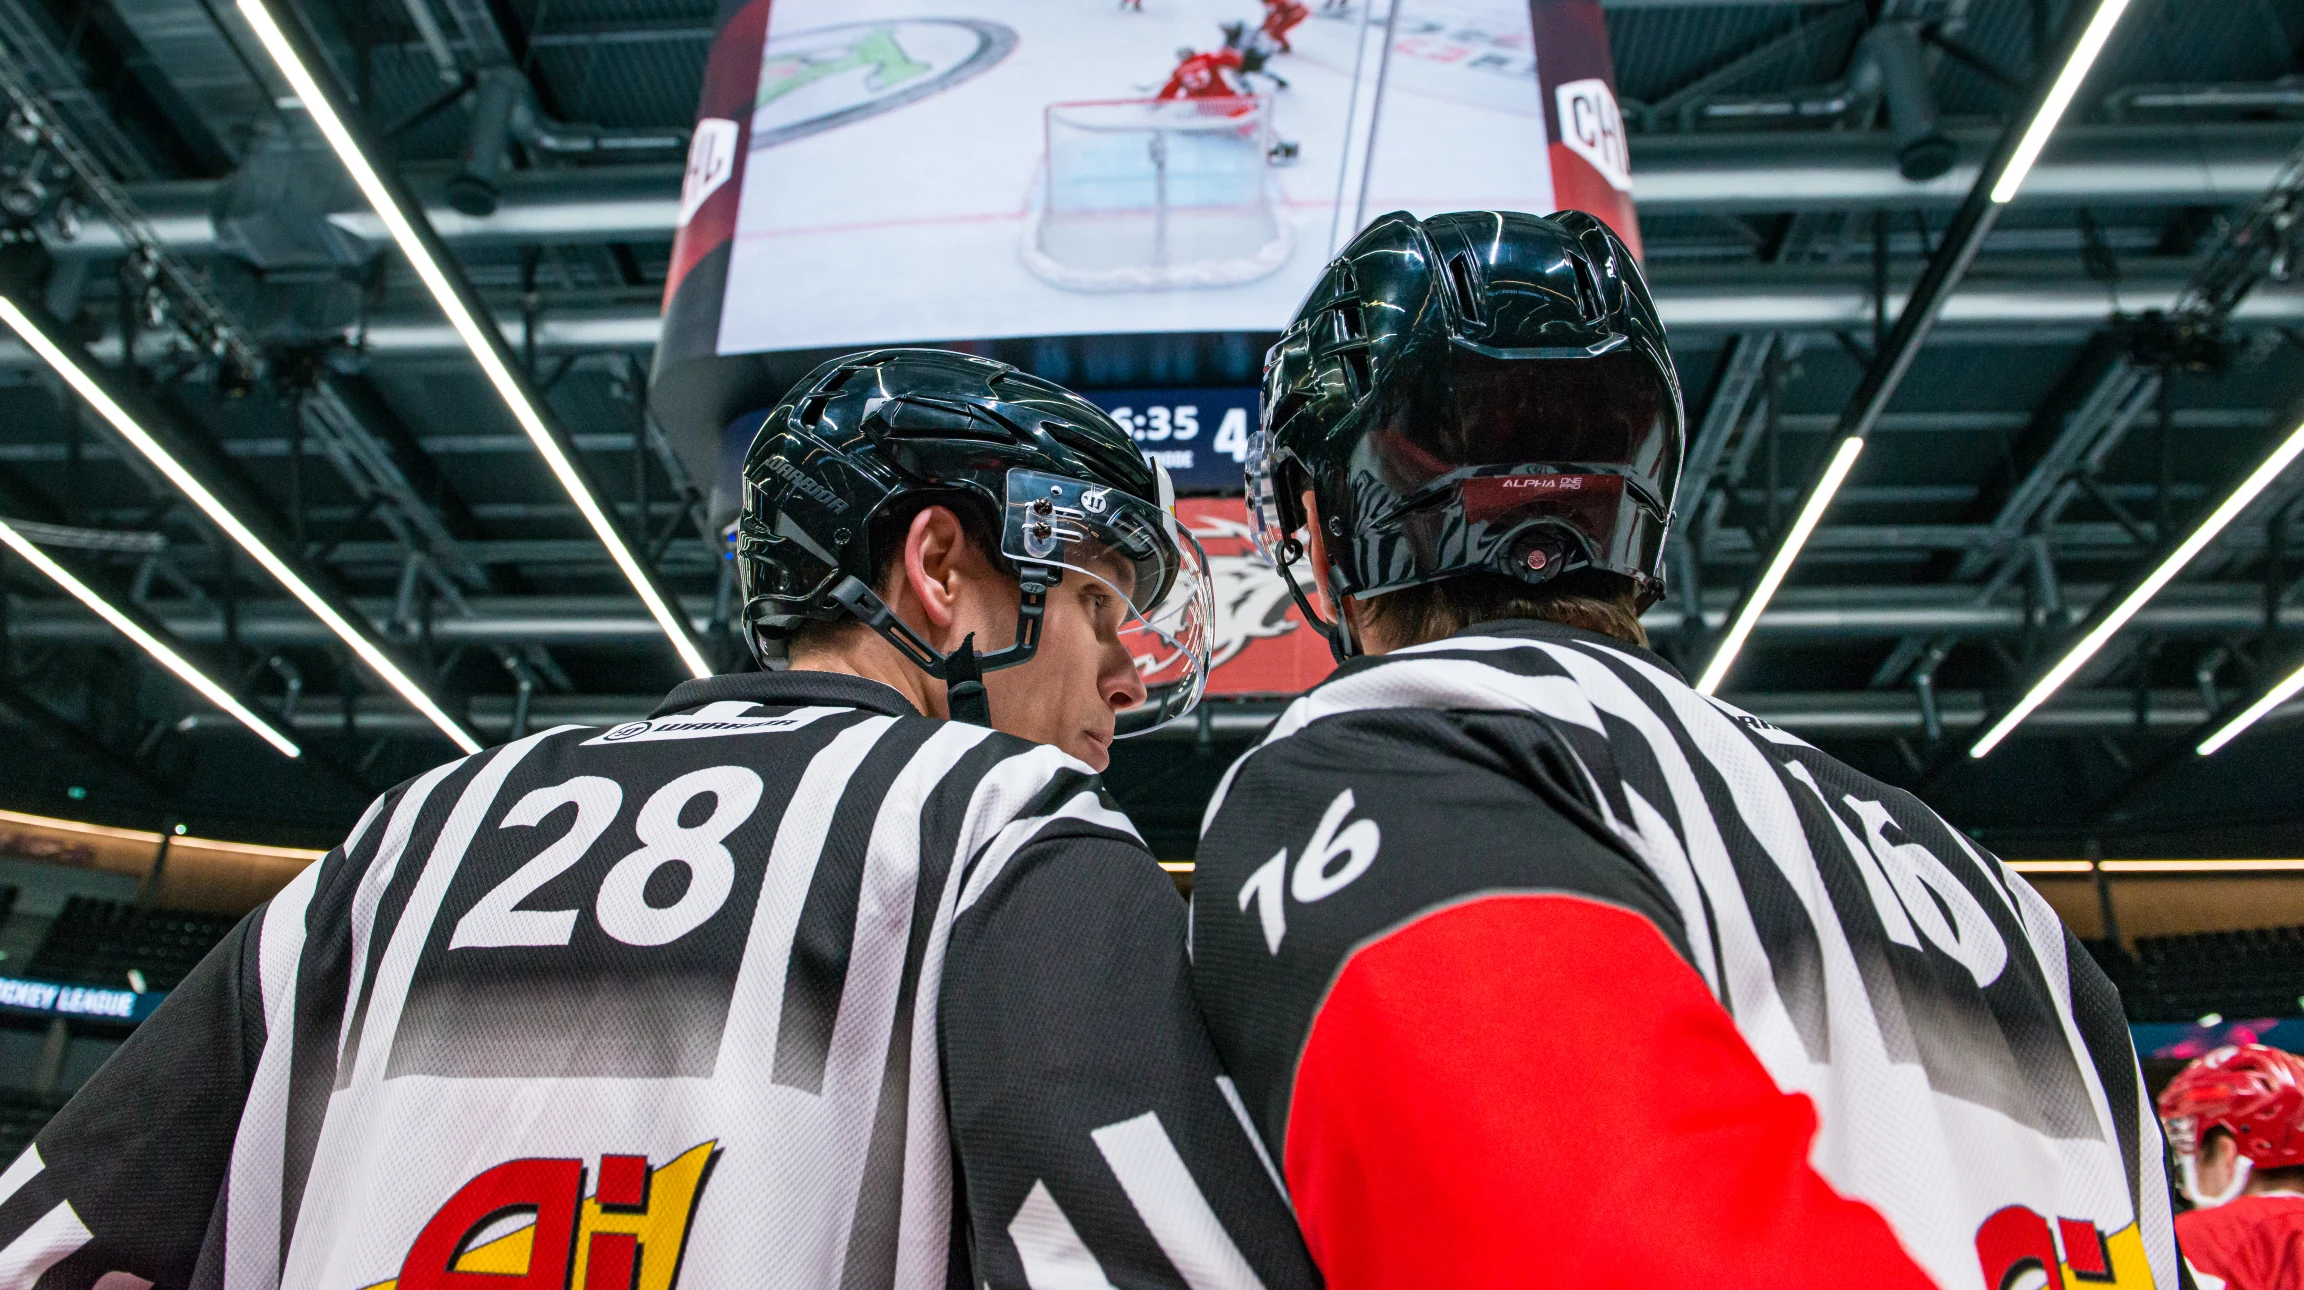 IIHF Names Referees and Linesmen for 2023 World Juniors